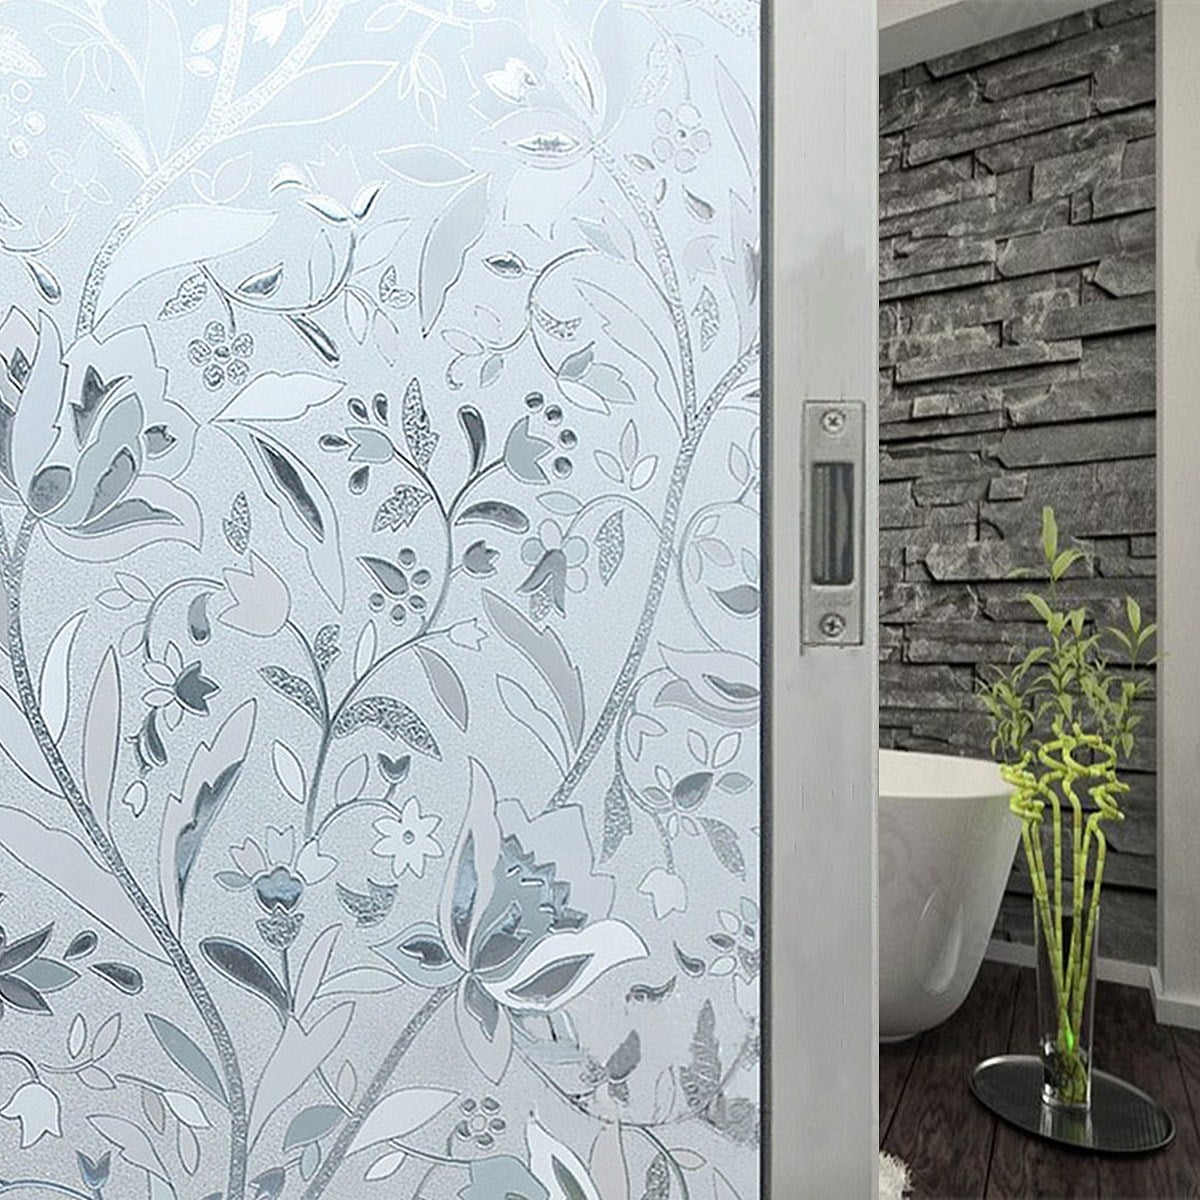 Waterproof Glass Frosted Bathroom window Decal Self Adhesive Film Wall Sticker 